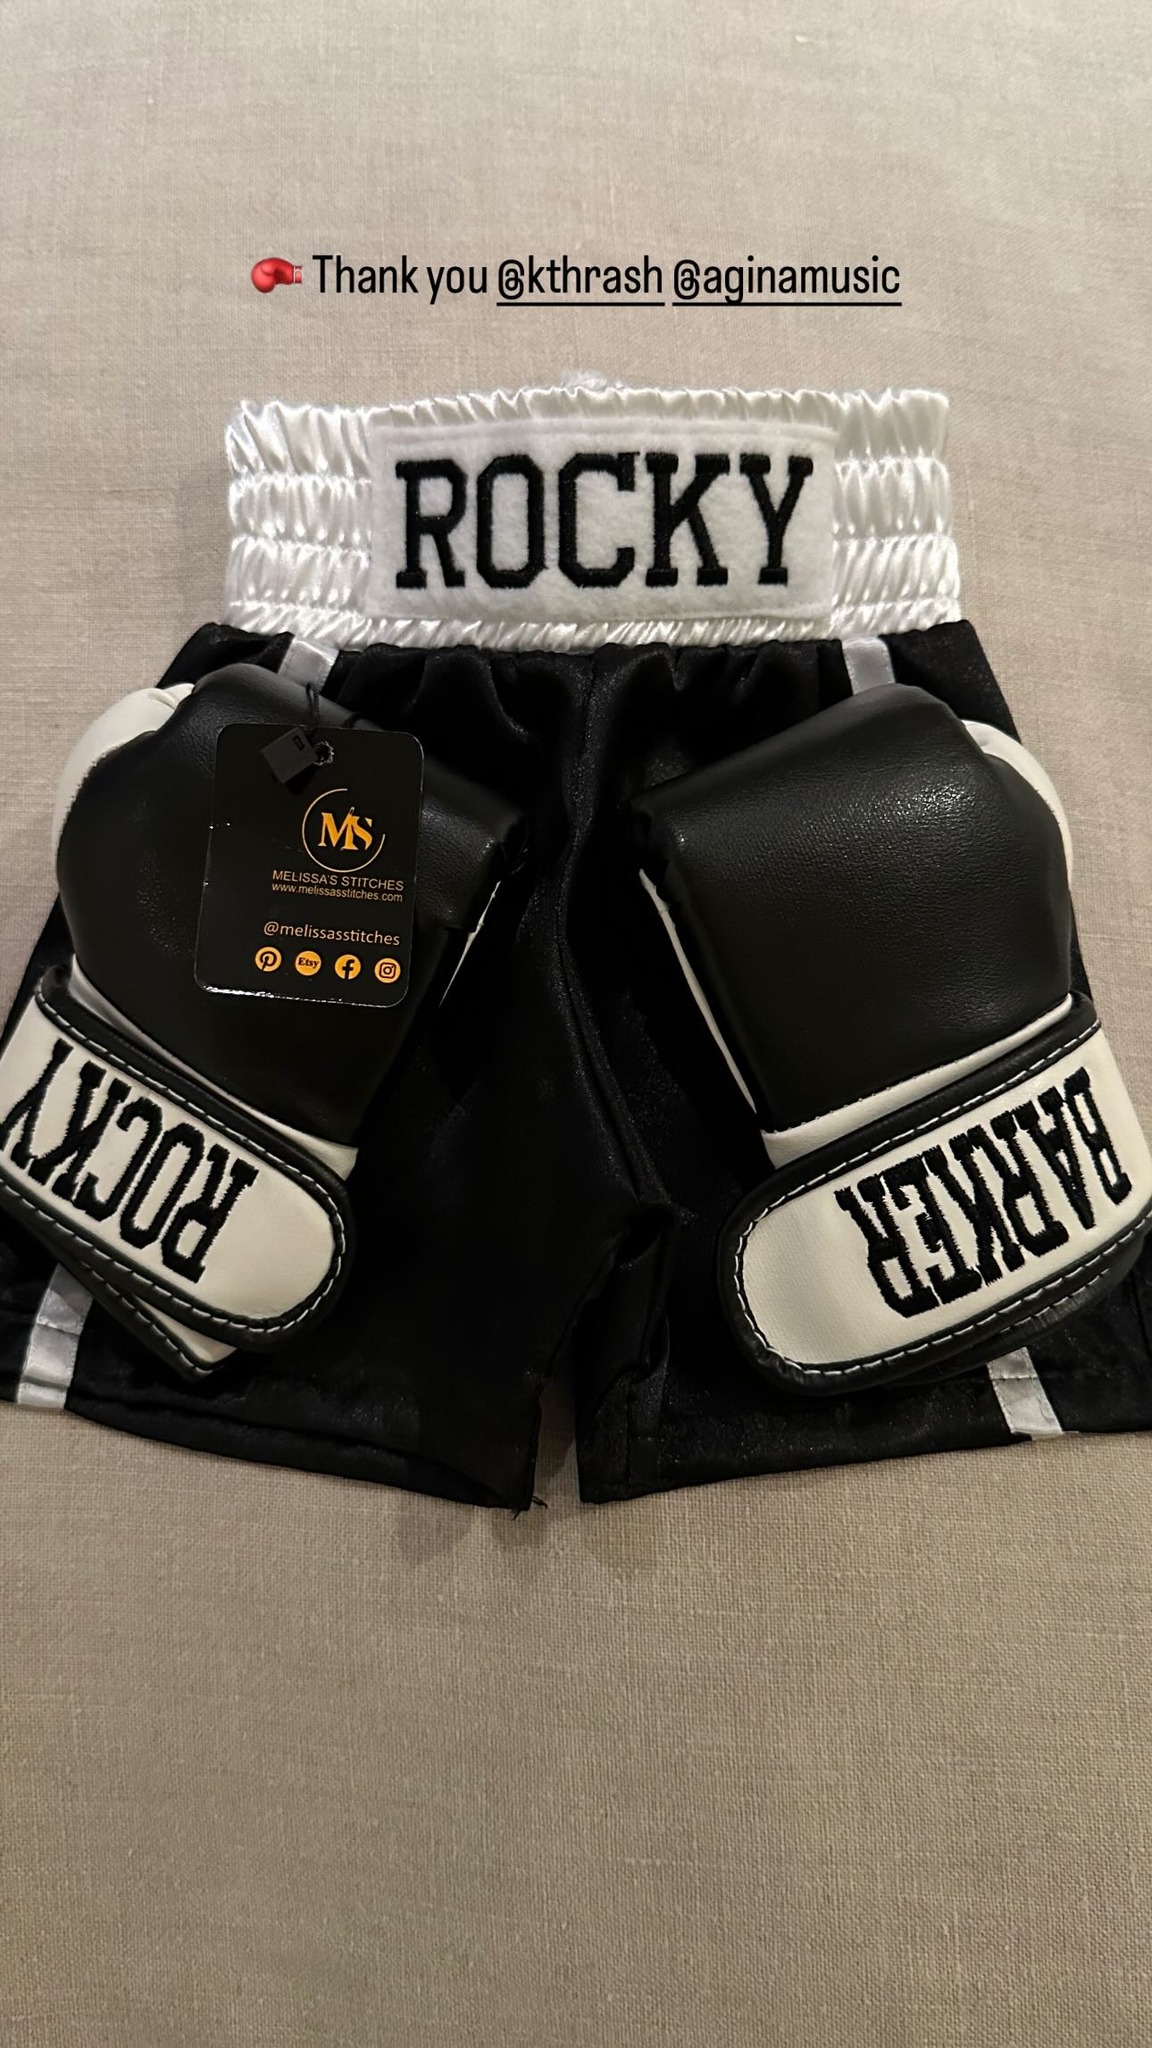 Rocky was gifted a pair of custom boxer shorts